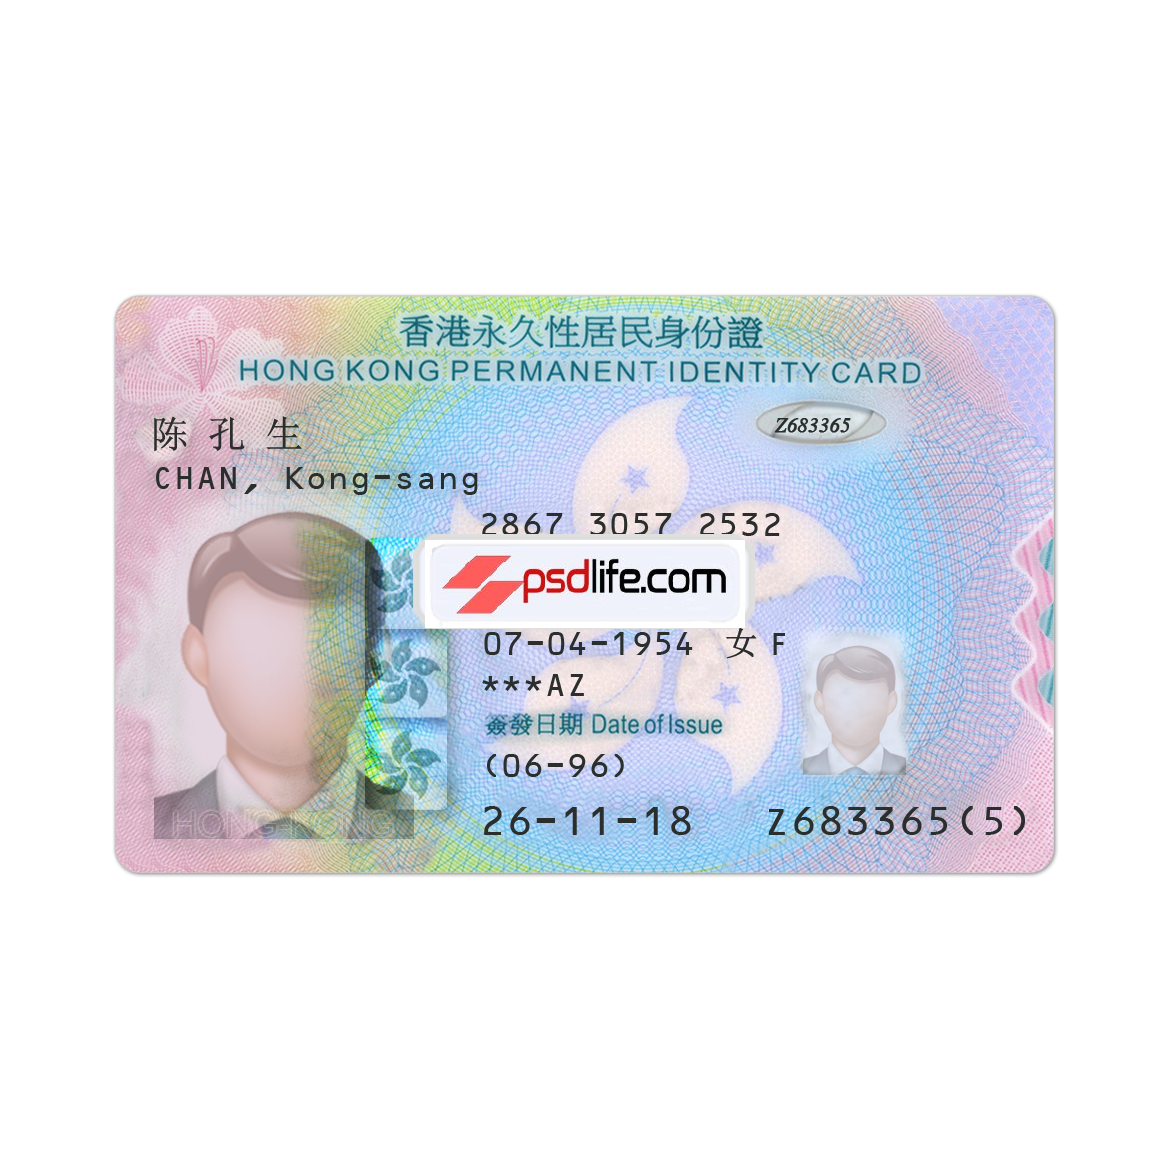 Hong Kong Fake ID Card Psd Templates with High quality | id card design template free download | ID Card Number Hong Kong | Hong Kong Fake ID Card Psd Templates with High quality | id card design template free download editable | 香港假身份证 Psd 模板可编辑免费下载